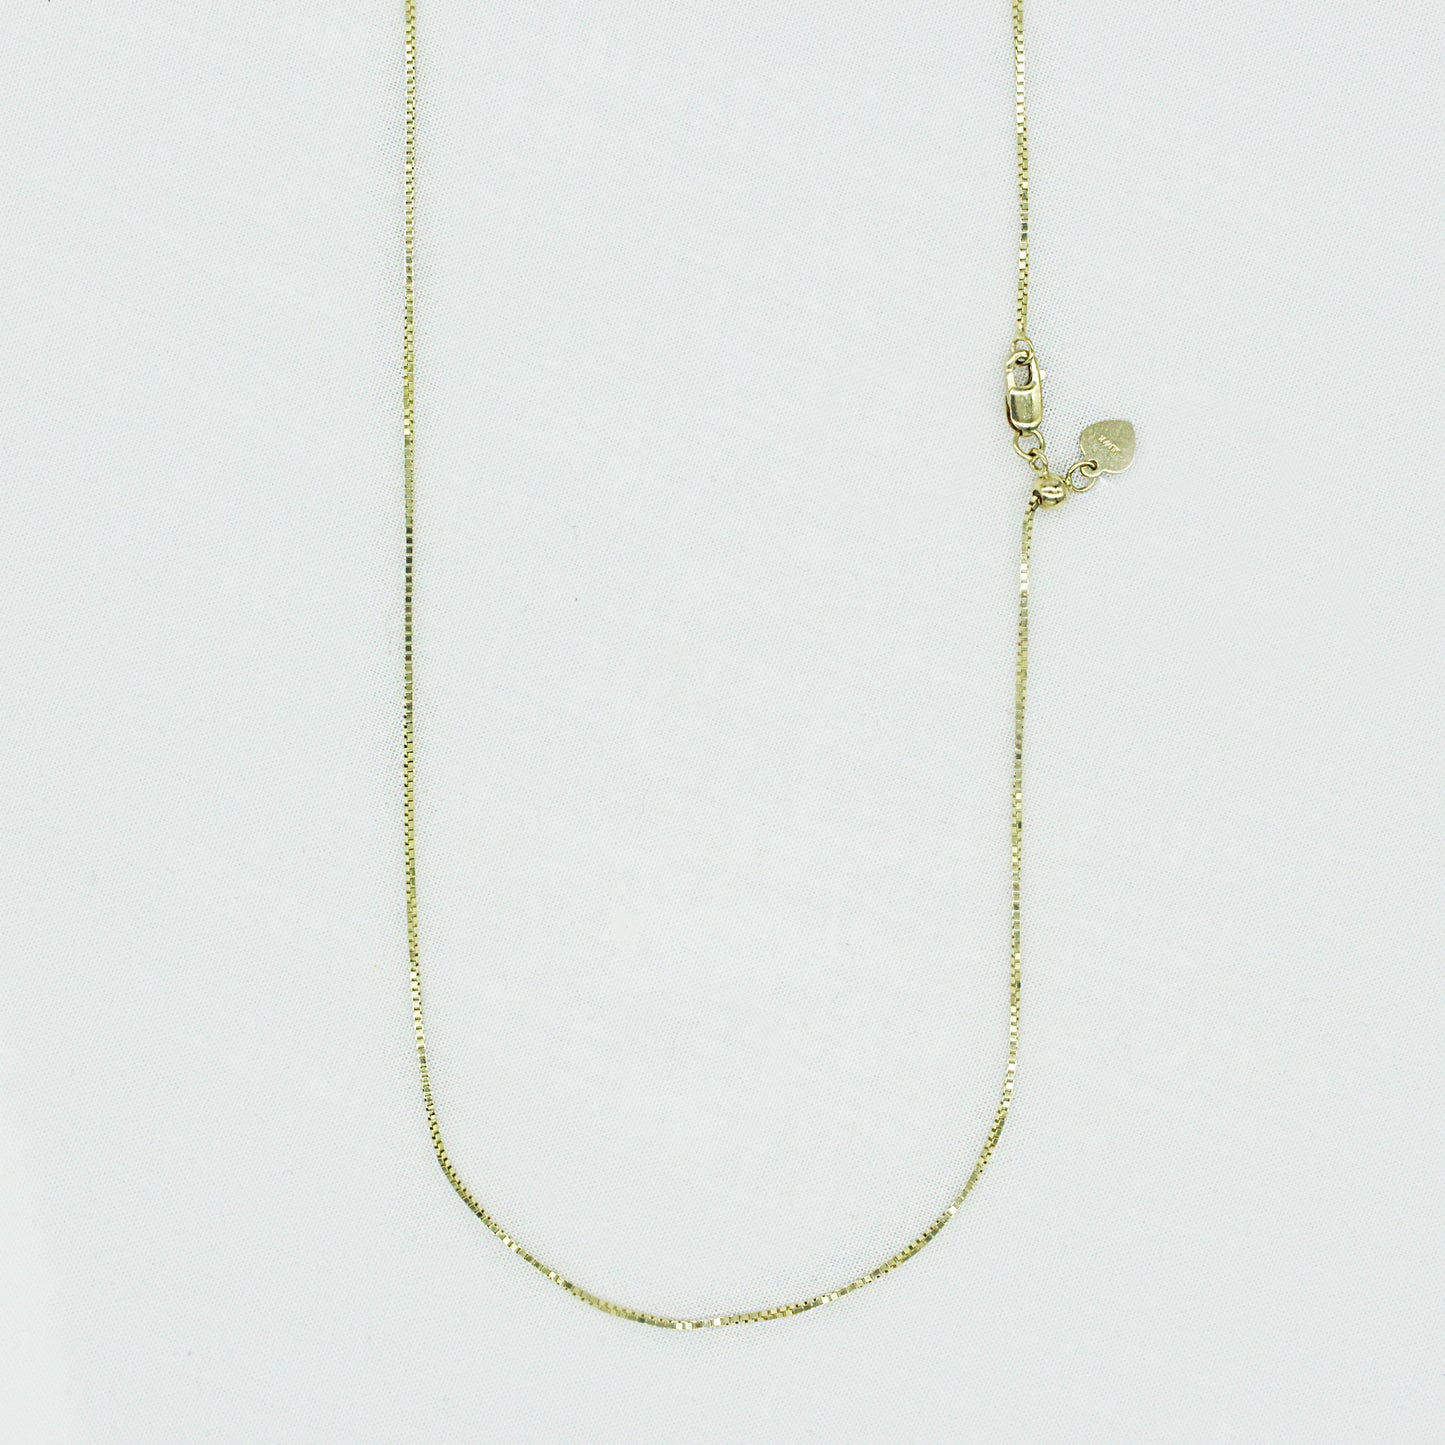 Adjustable Box Link Chain in Gold